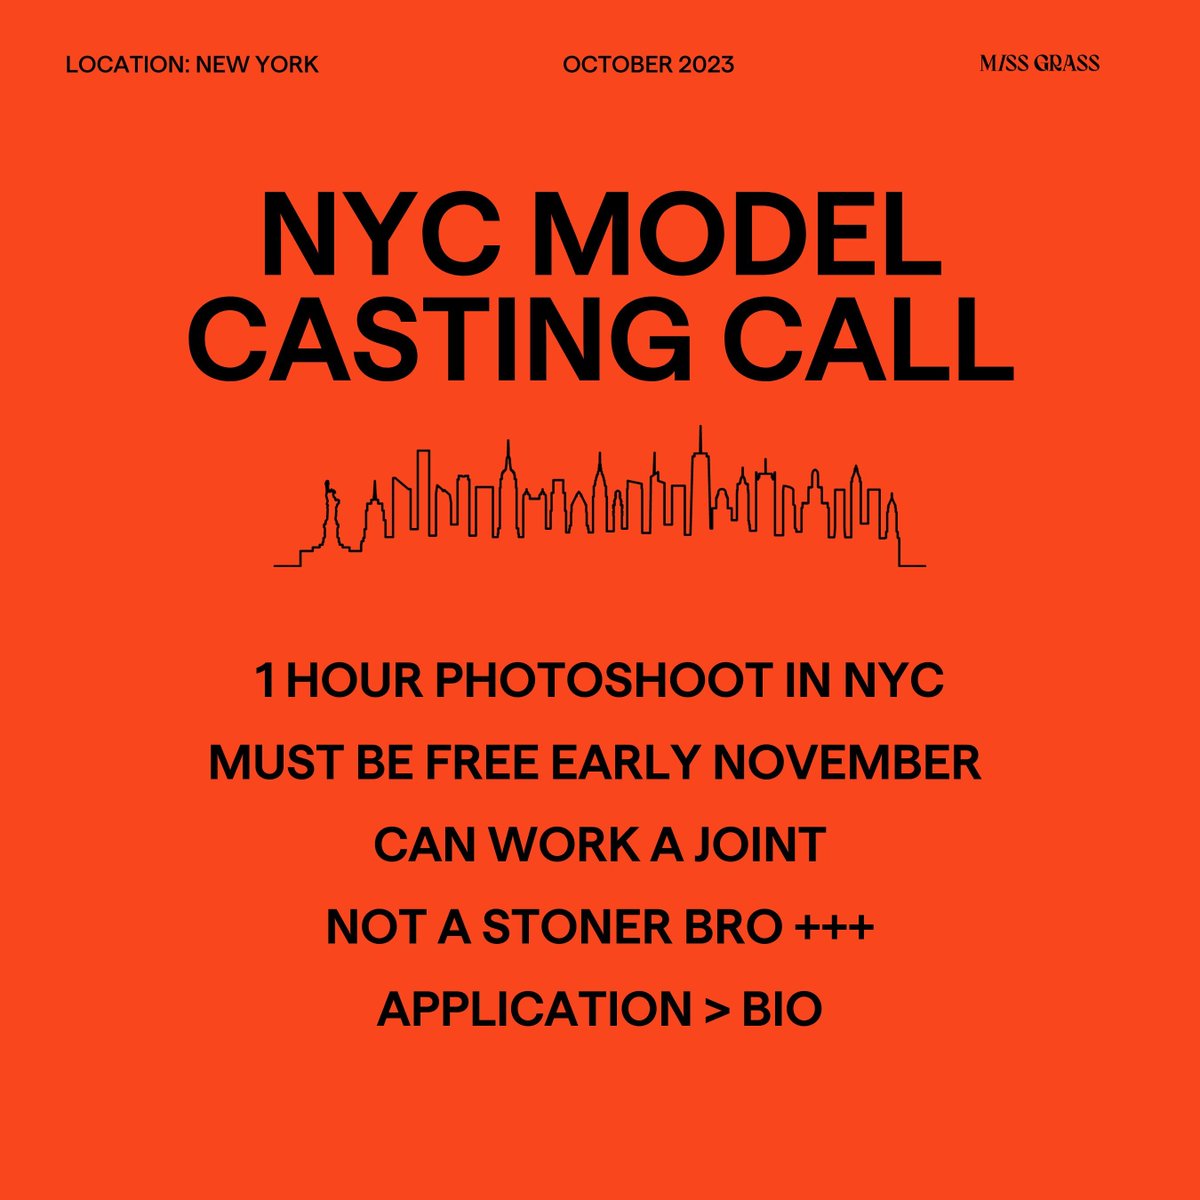 Miss Grass is looking for plant-puffing,the-camera-loves-me buds to strike a pose in the studio in November. POC, queer, trans folks, all abilities, bodies, ages, and styles to the front row. Apply > link (Closes 10/31). #modelcasting #modelcastingnyc #weed #cannabis #nycmodel